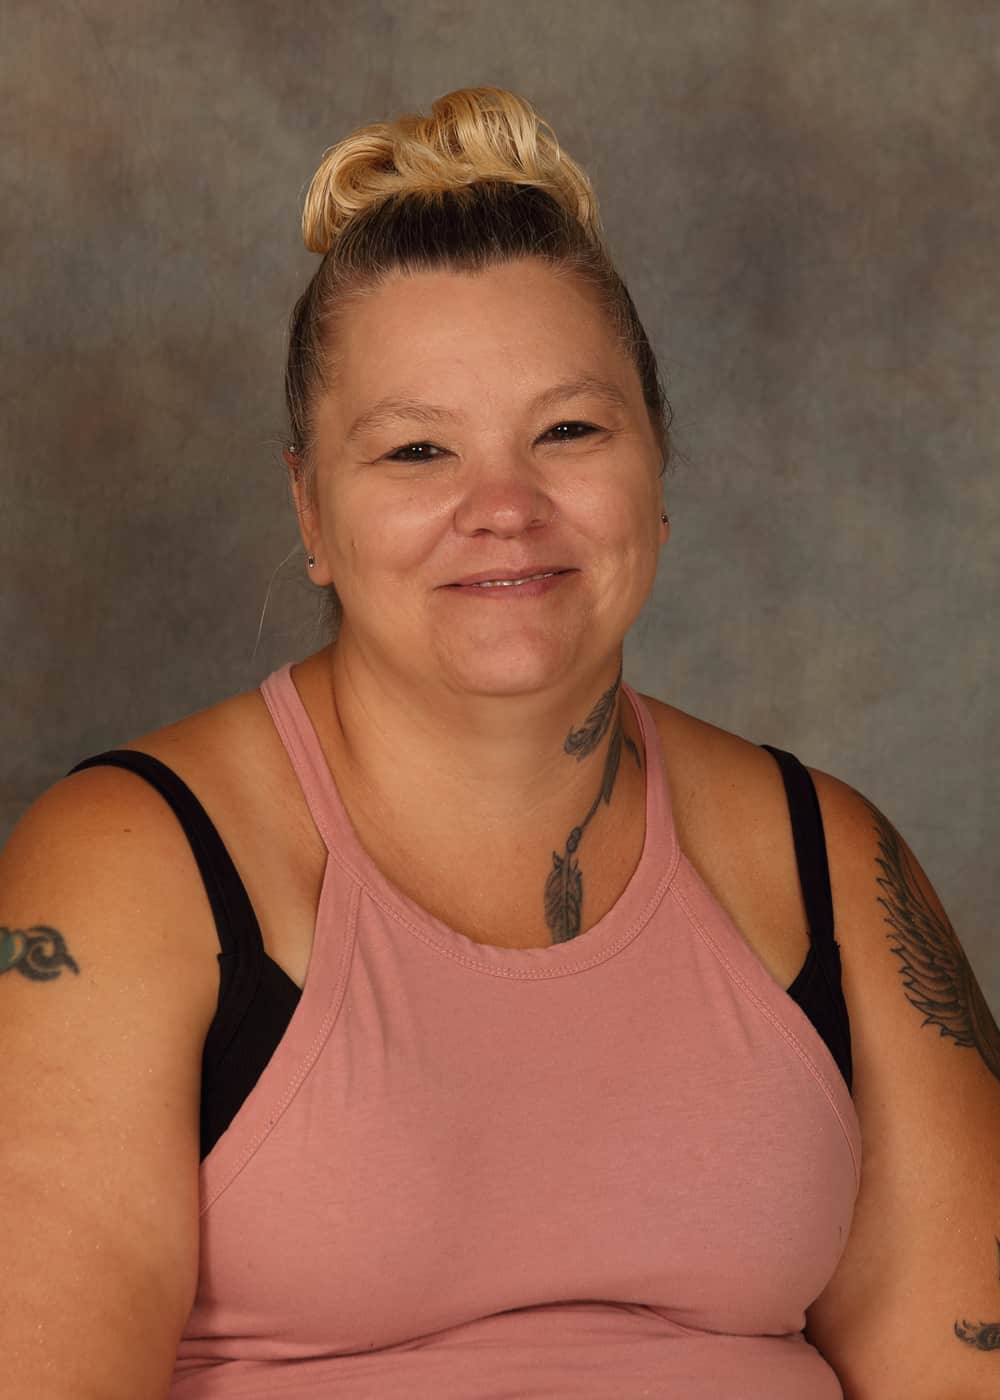 Photo of Lead Teacher Rhonda Coleman. She is a Caucasian woman with brown and blonde hair in a bun, and a pink shirt.